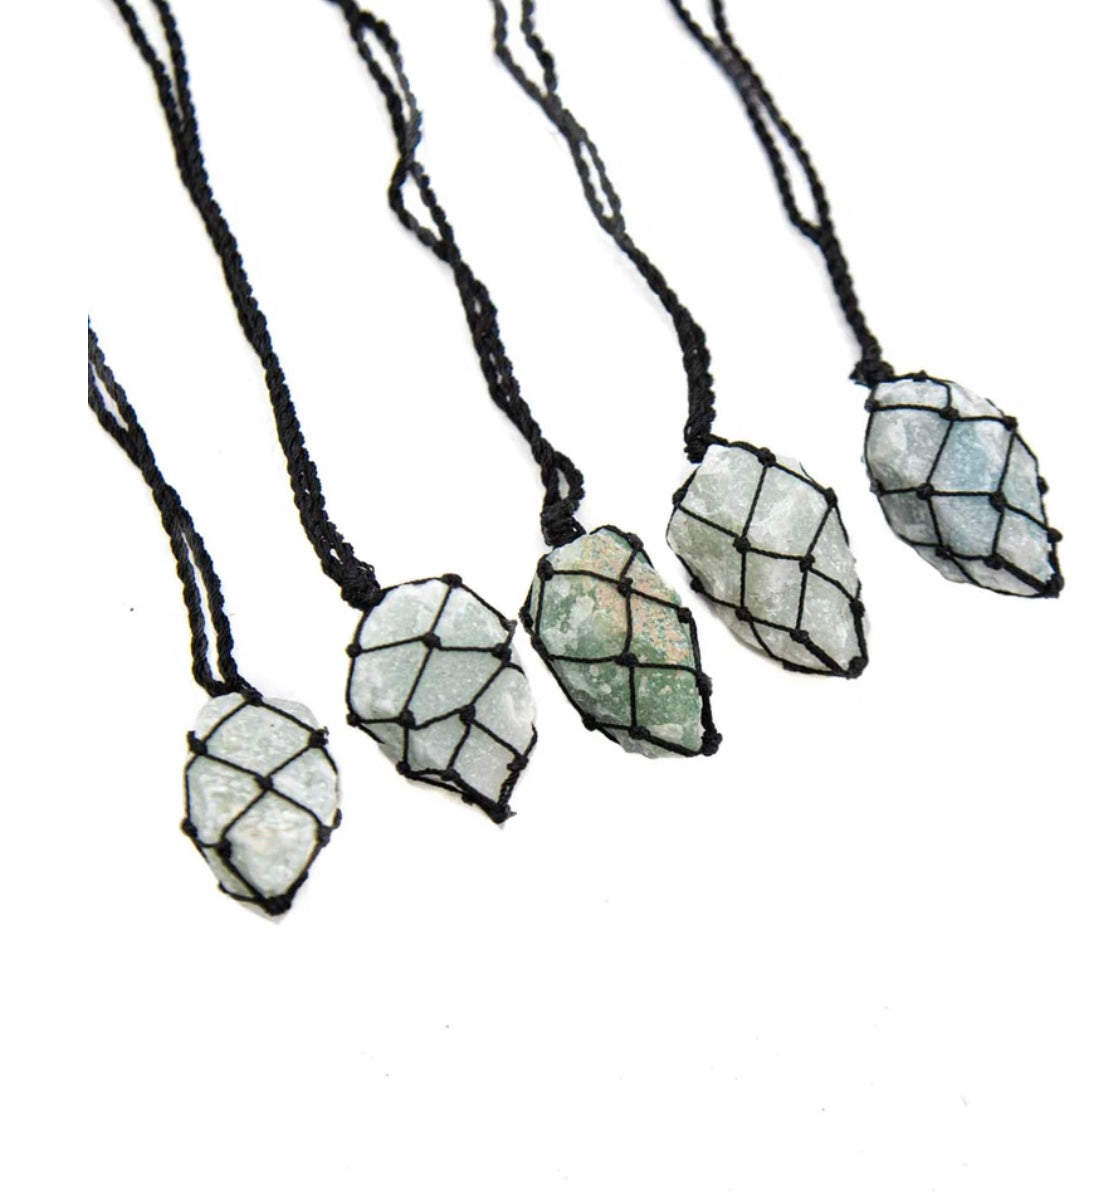 Uniquely crafted Hemp Macramé necklace with Green Aventurine crystal